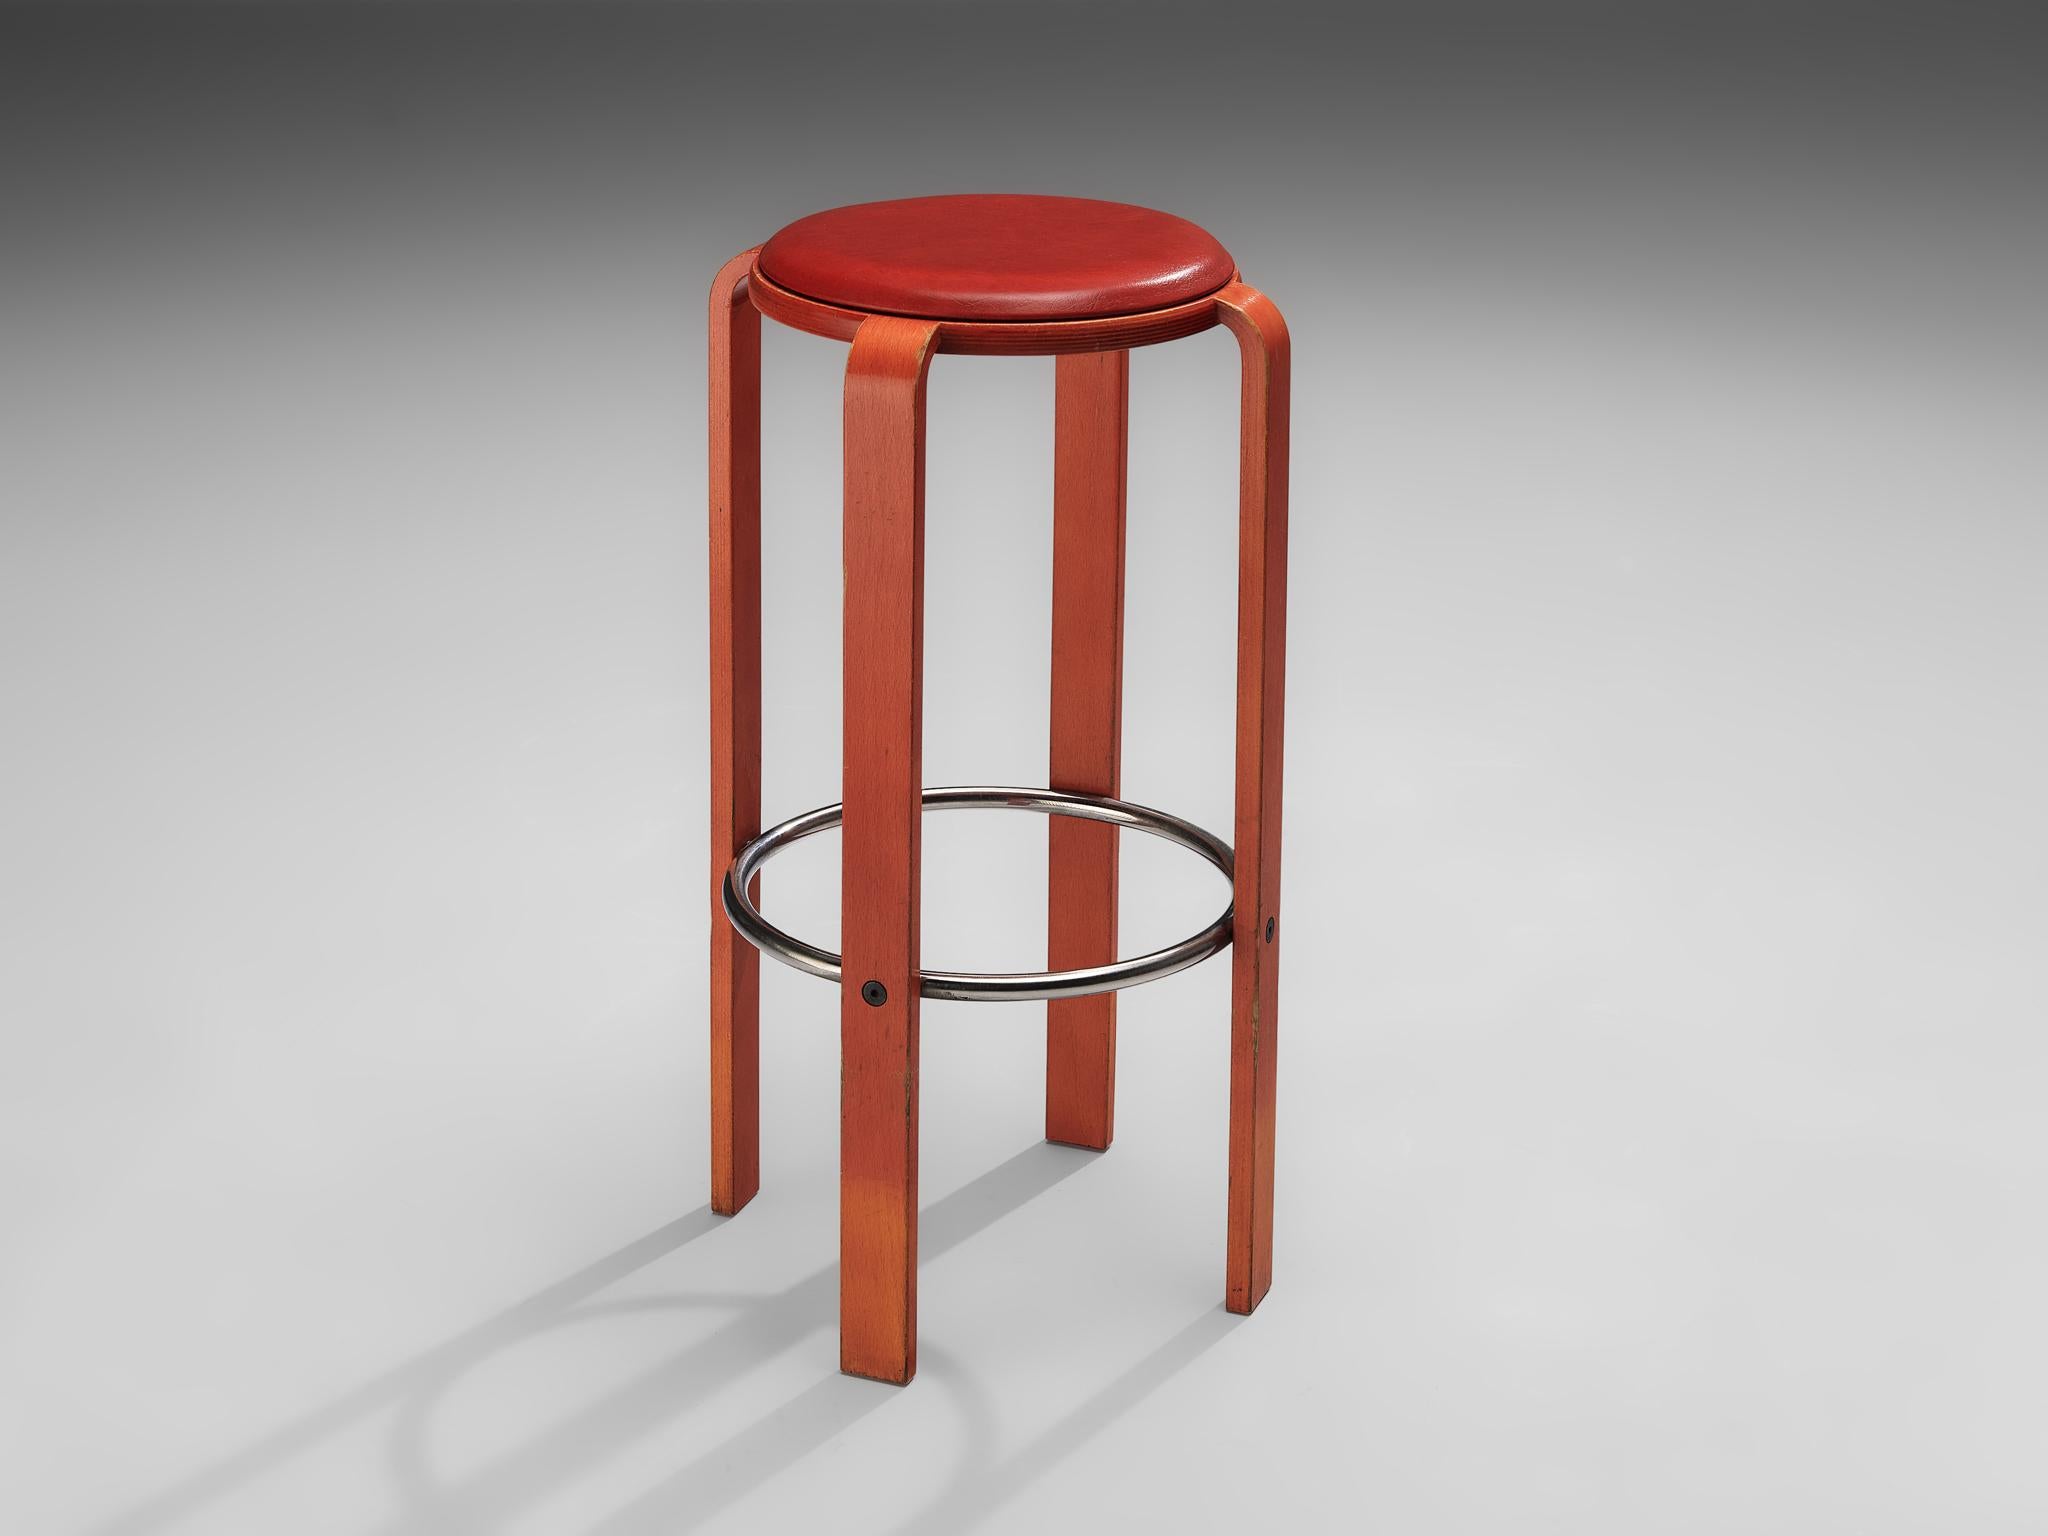 Bruno Rey for Dietiker, barstool, plywood, leather, metal, Switzerland, 1970s

Constructed from vibrant red lacquered plywood, the stool exudes a sense of warmth and sophistication, while the padded seat, luxuriously finished with supple red